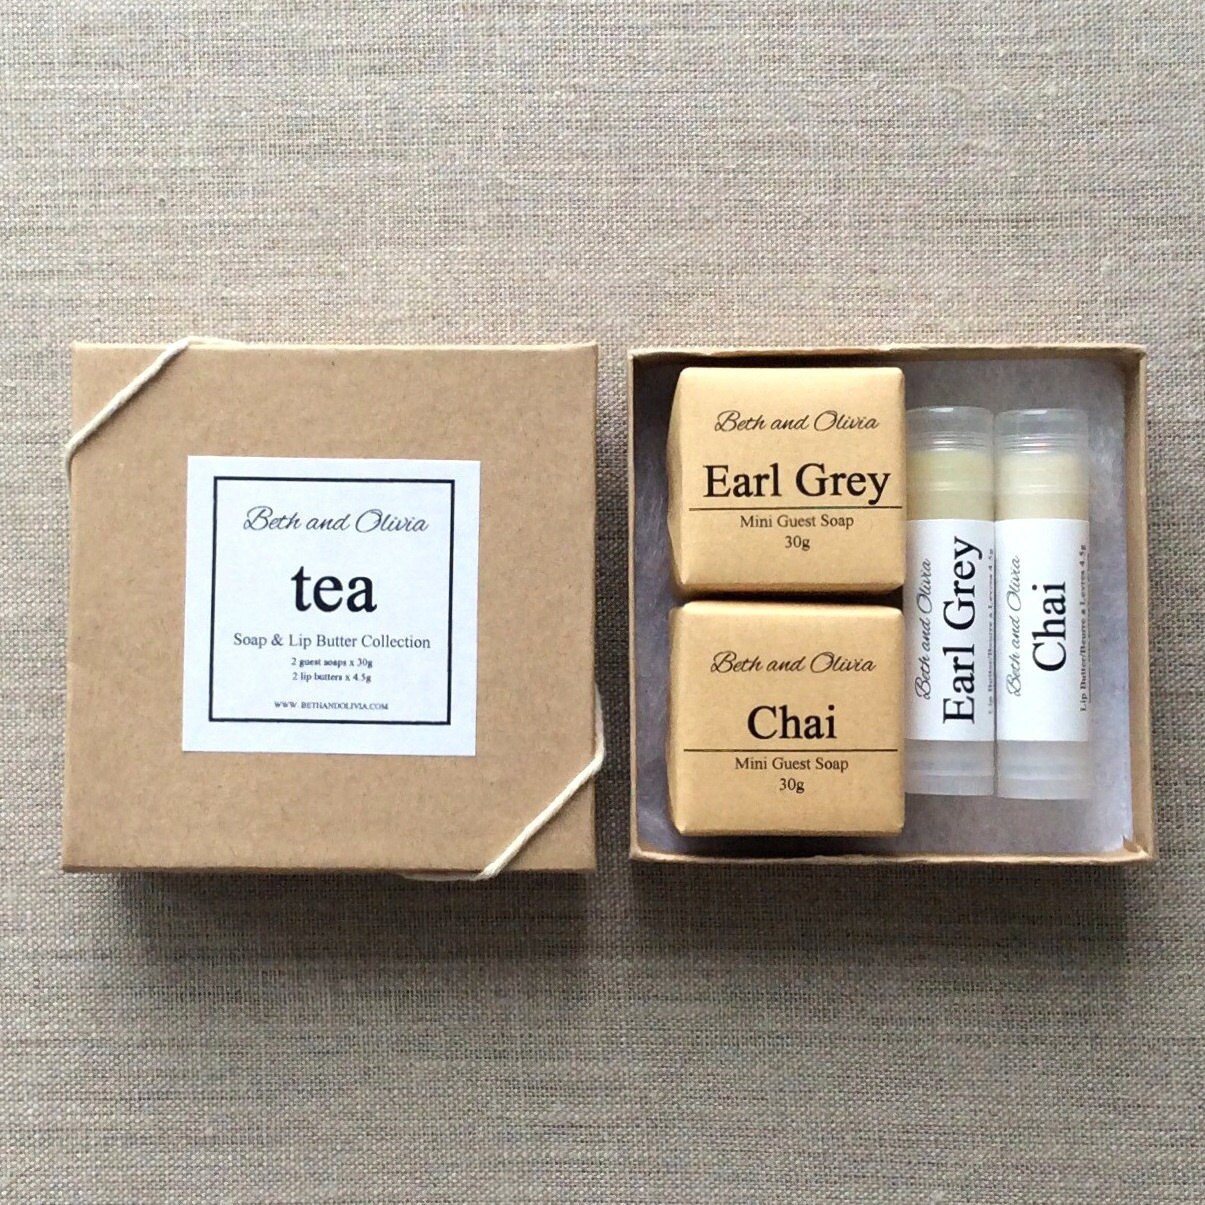 Tea Soap and Lip Butter Gift Set, lip balm gift set, soap gift set, chai gift set, guest soaps, Mother's Day gift, Earl grey gift set